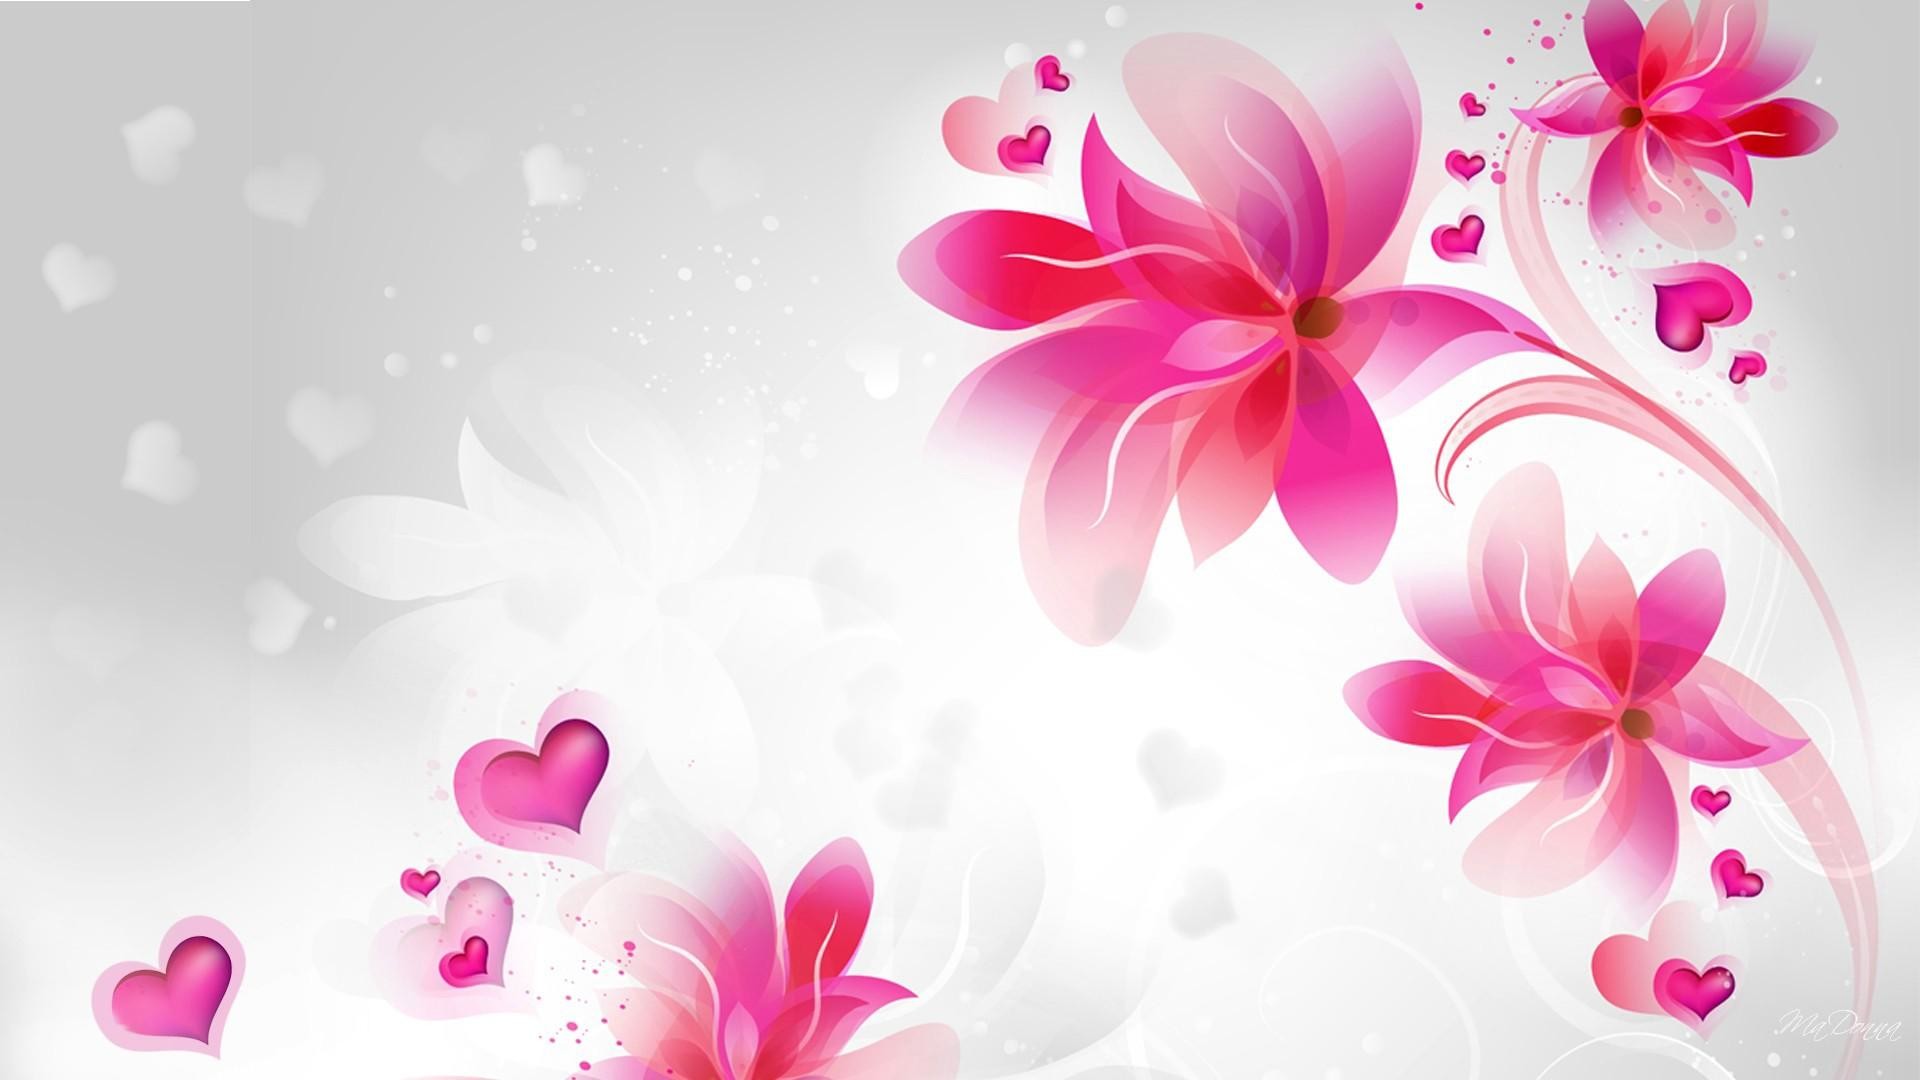 36576765 Floral Background Images Stock Photos  Vectors  Shutterstock